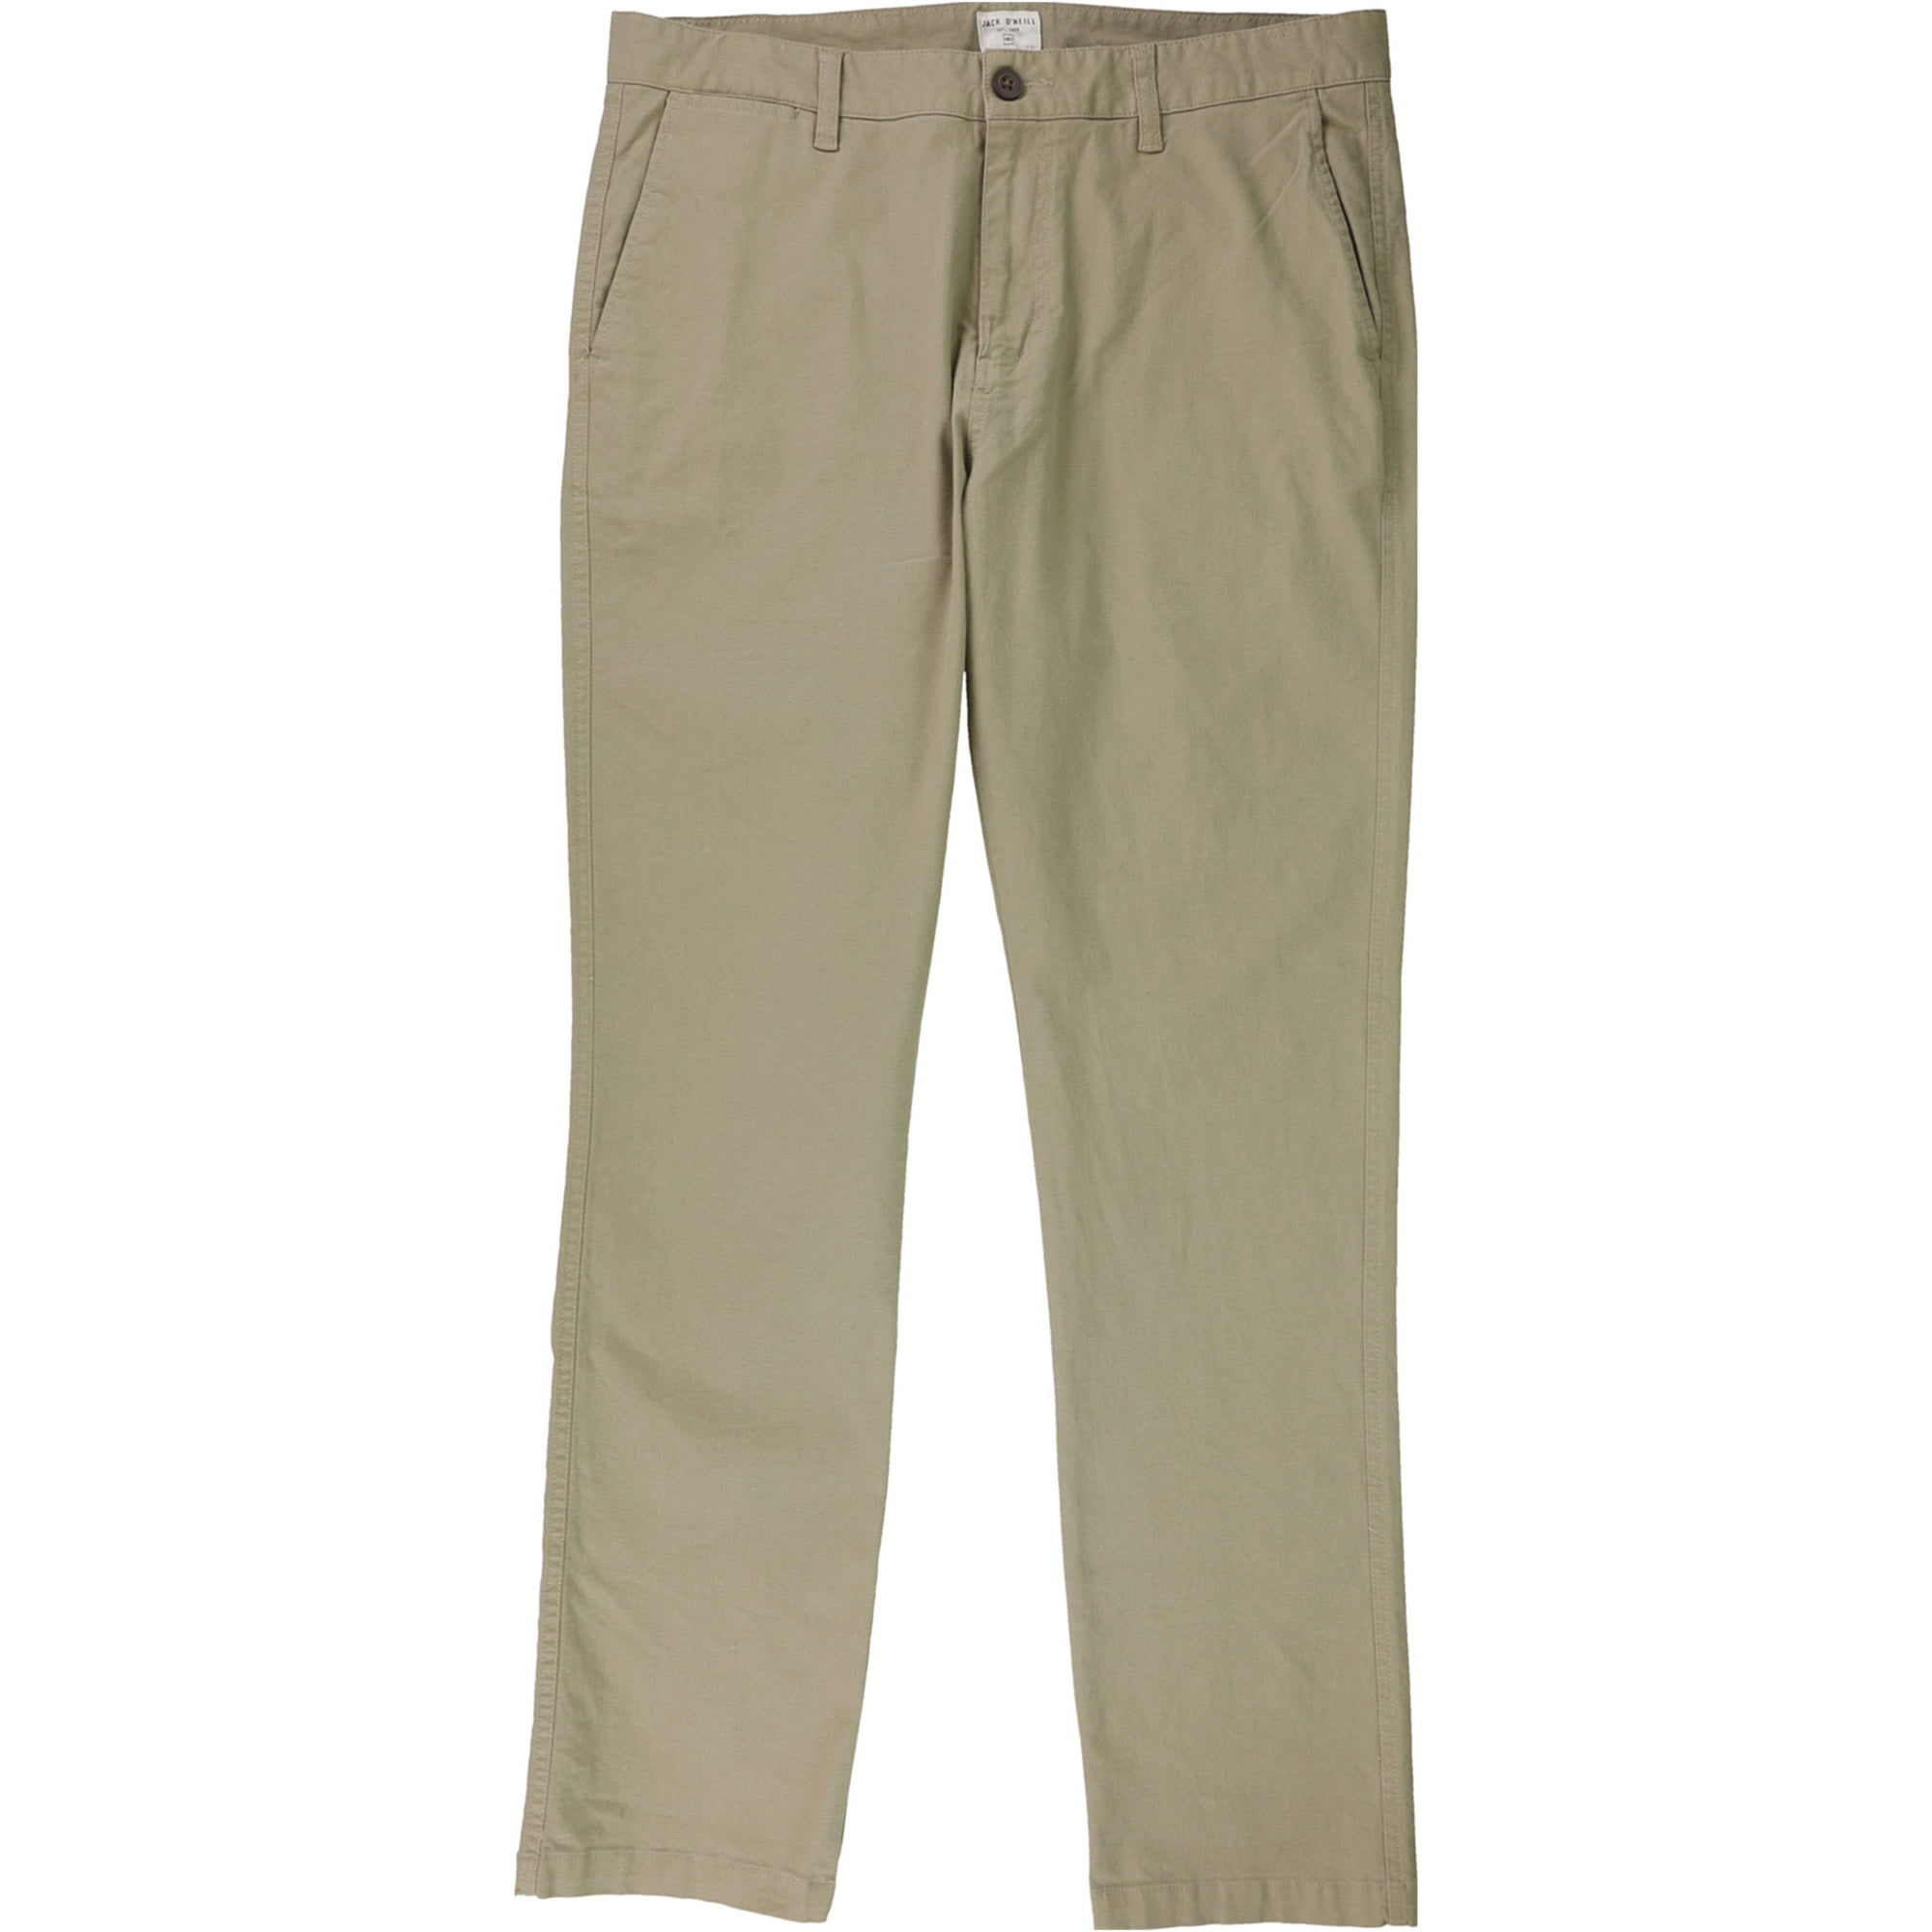 French Toast Boys Size 10 Khaki Pull-On Relaxed Fit Uniform Pants NWT